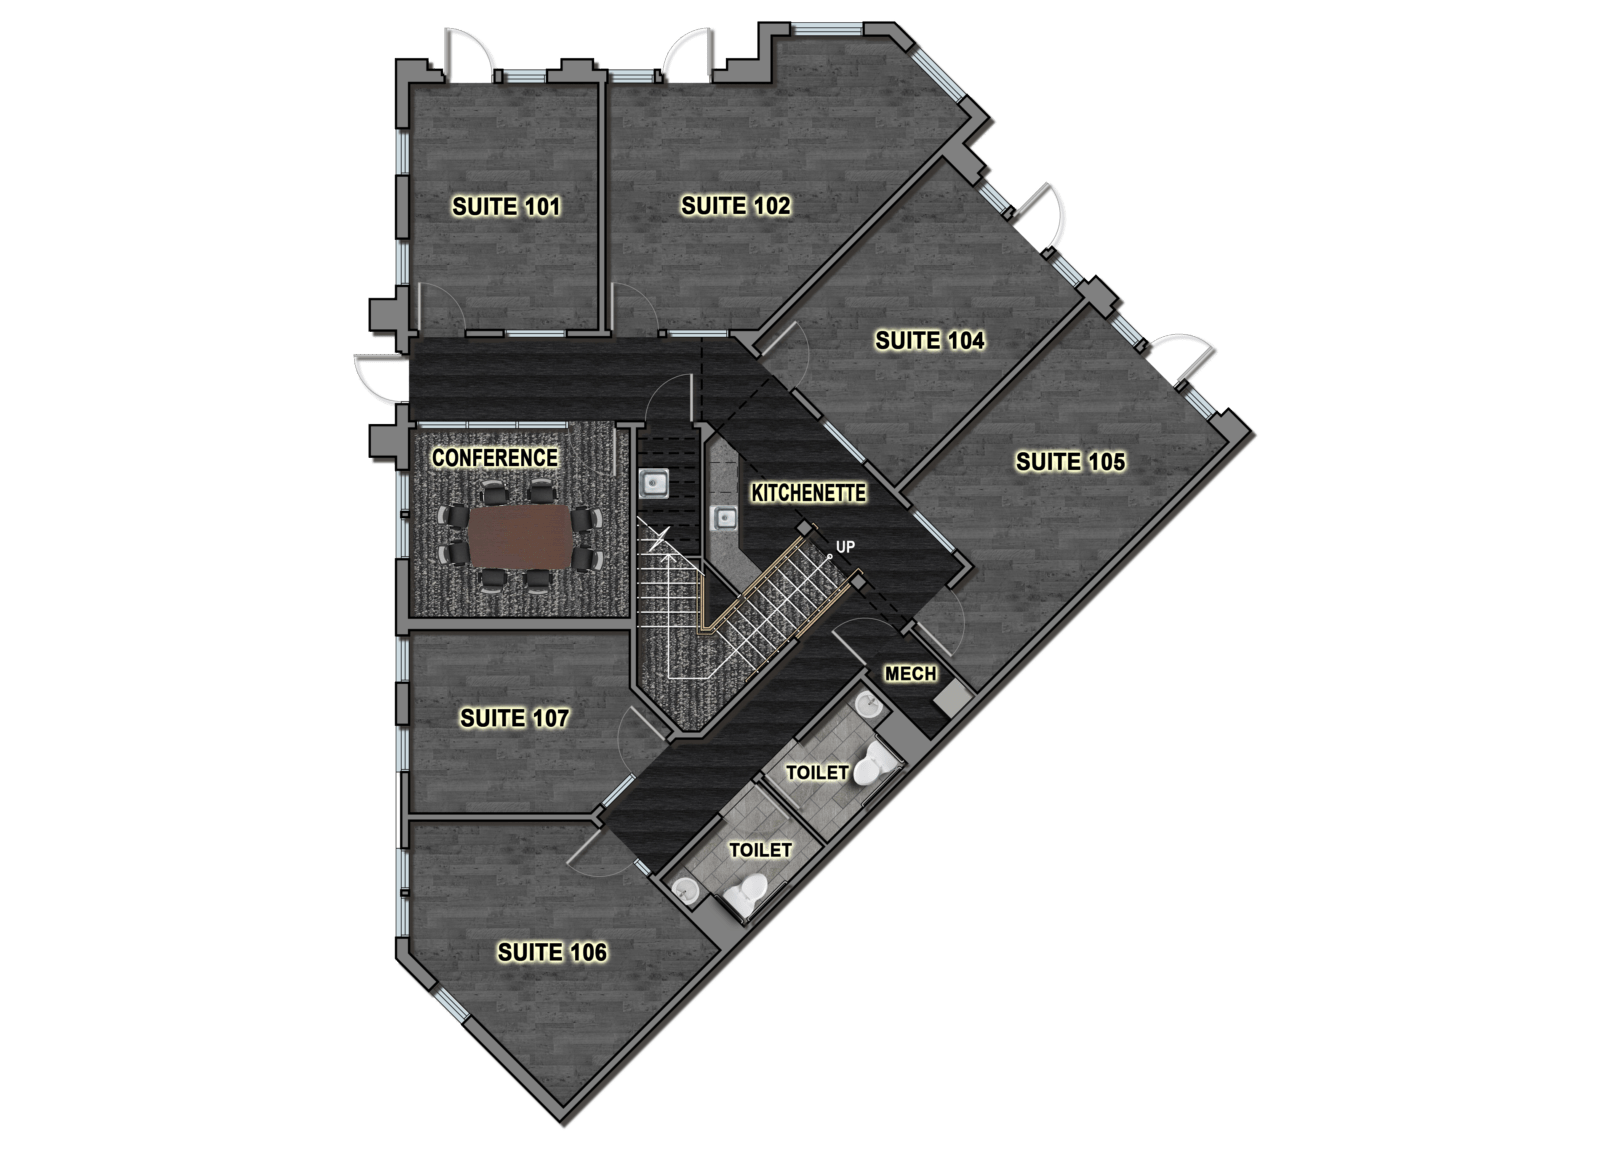 A floor plan of suites with a conference room and kitchenette